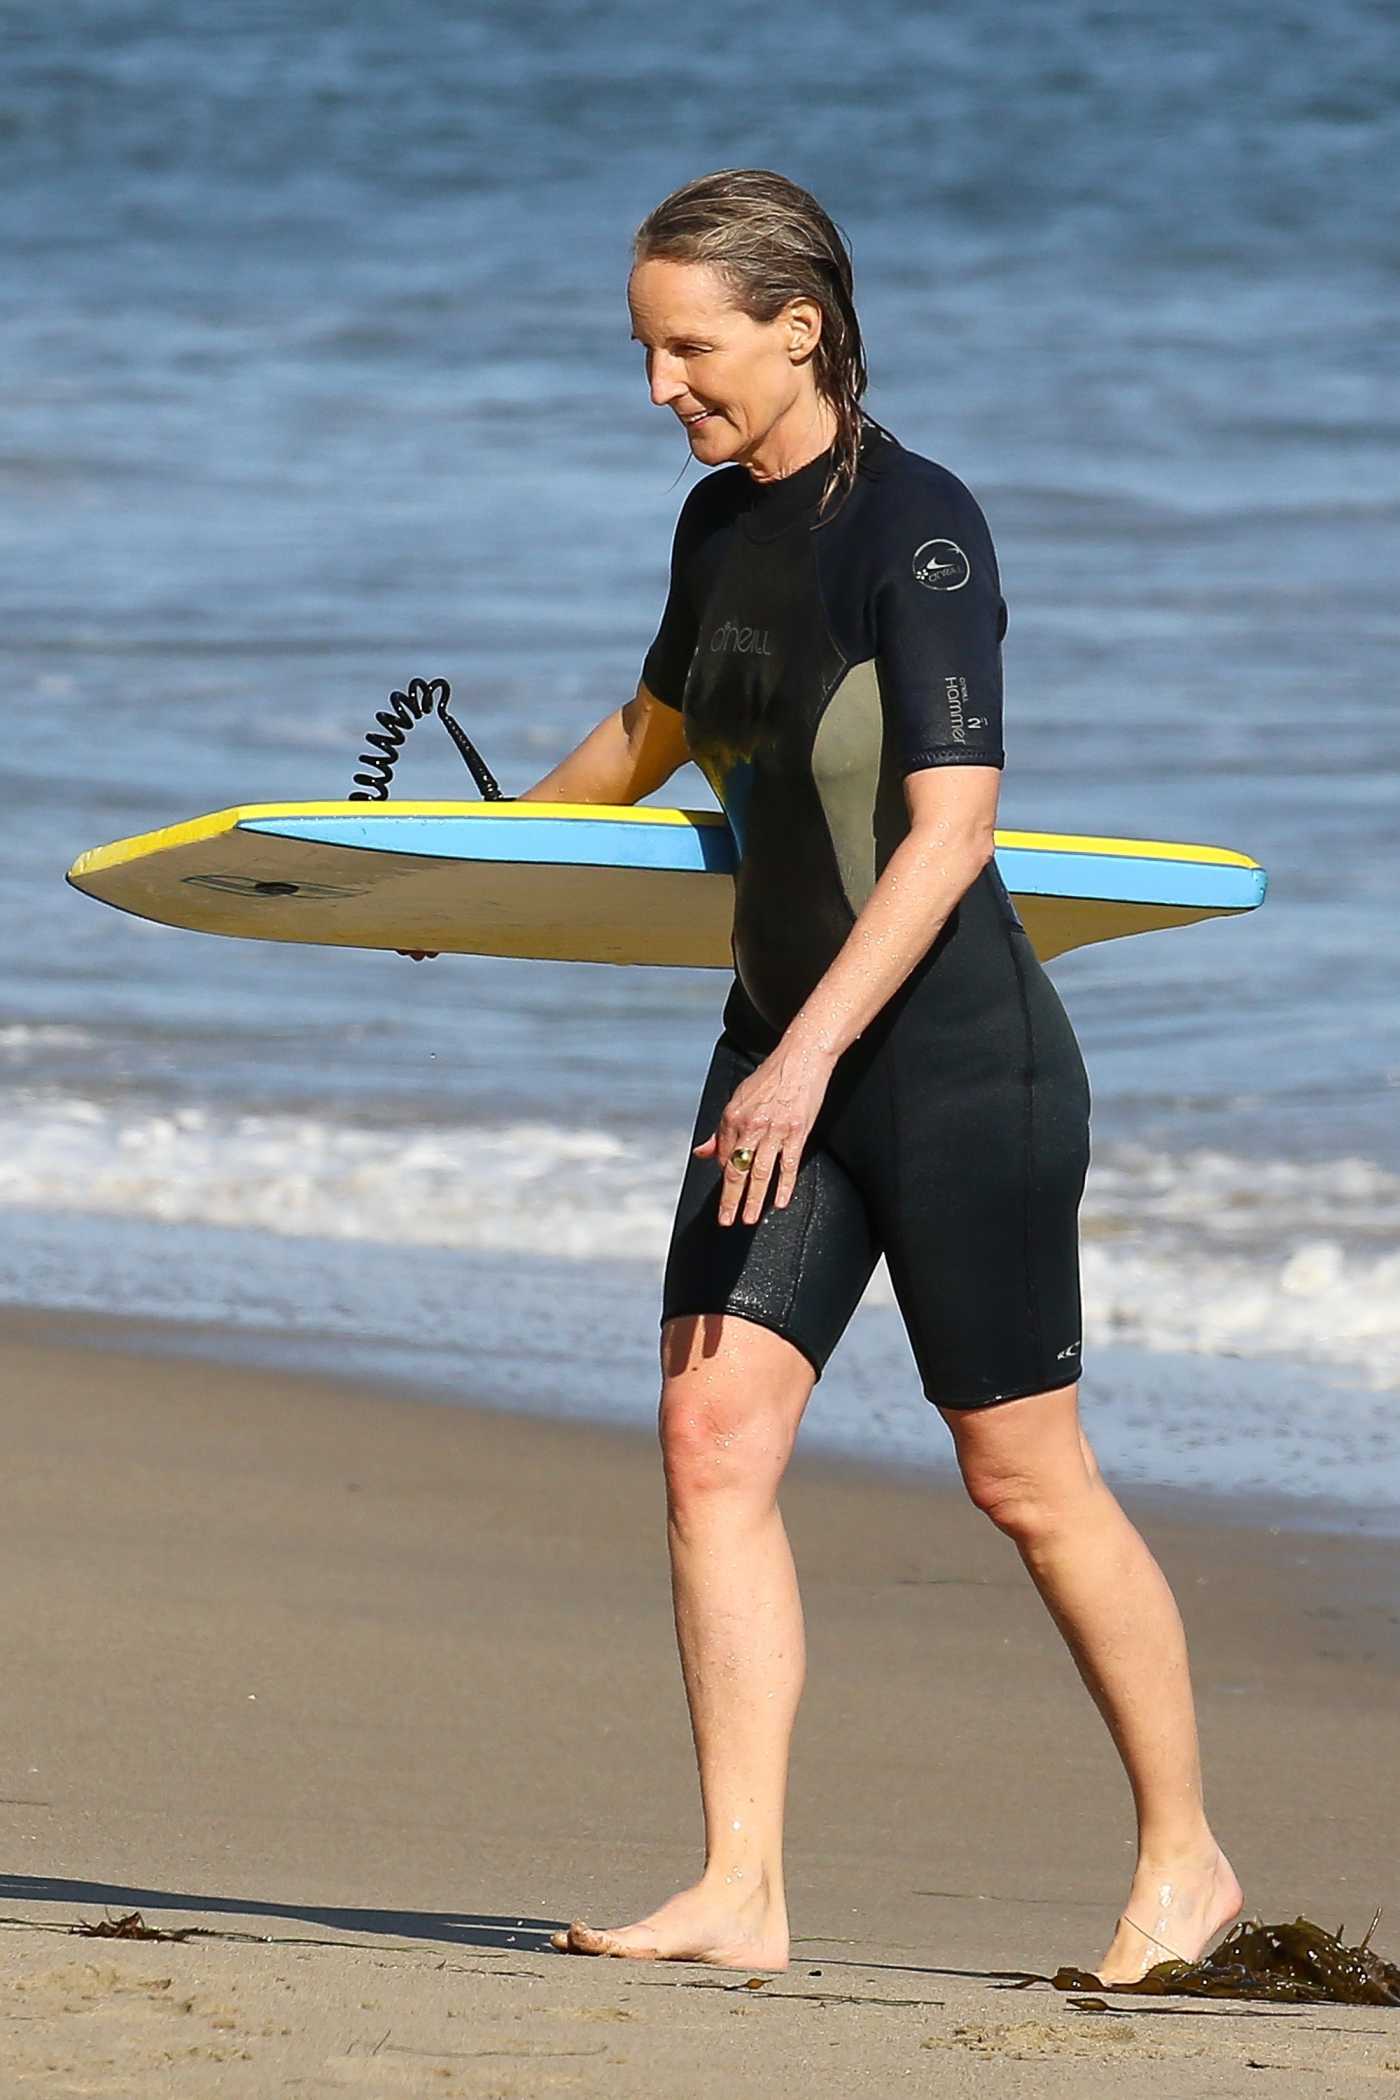 Helen Hunt Enjoys Her Morning with a Bodyboarding Session on the Beach in Malibu 06/13/2020